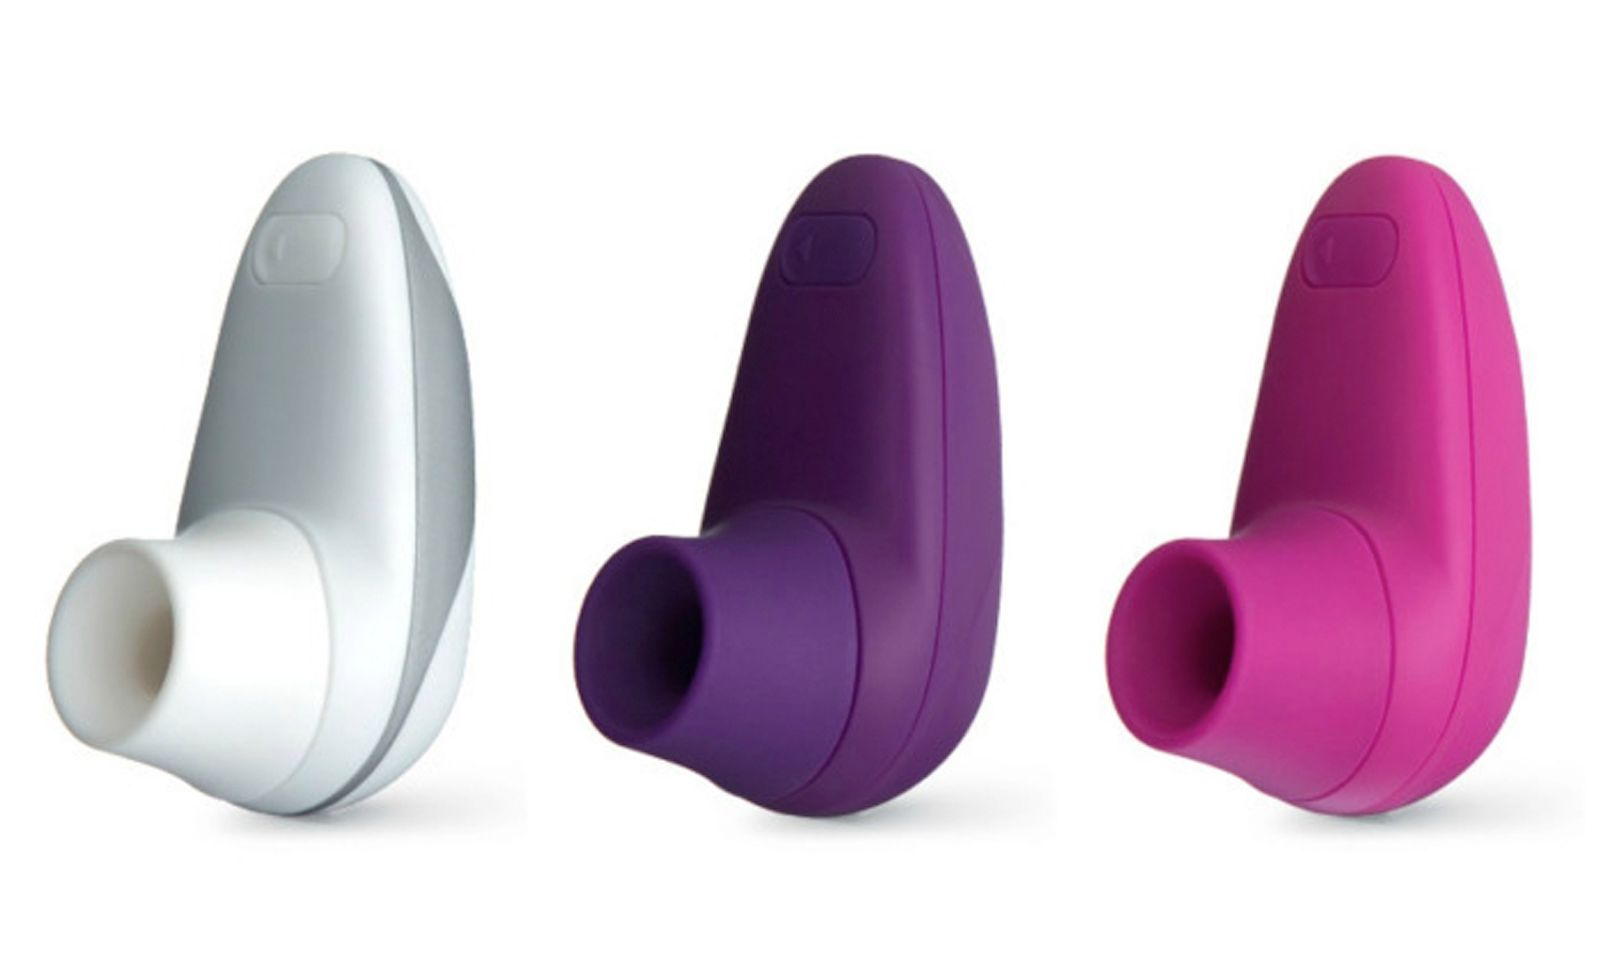 Womanizer's Starlet Suction Massager Shipping From Entrenue